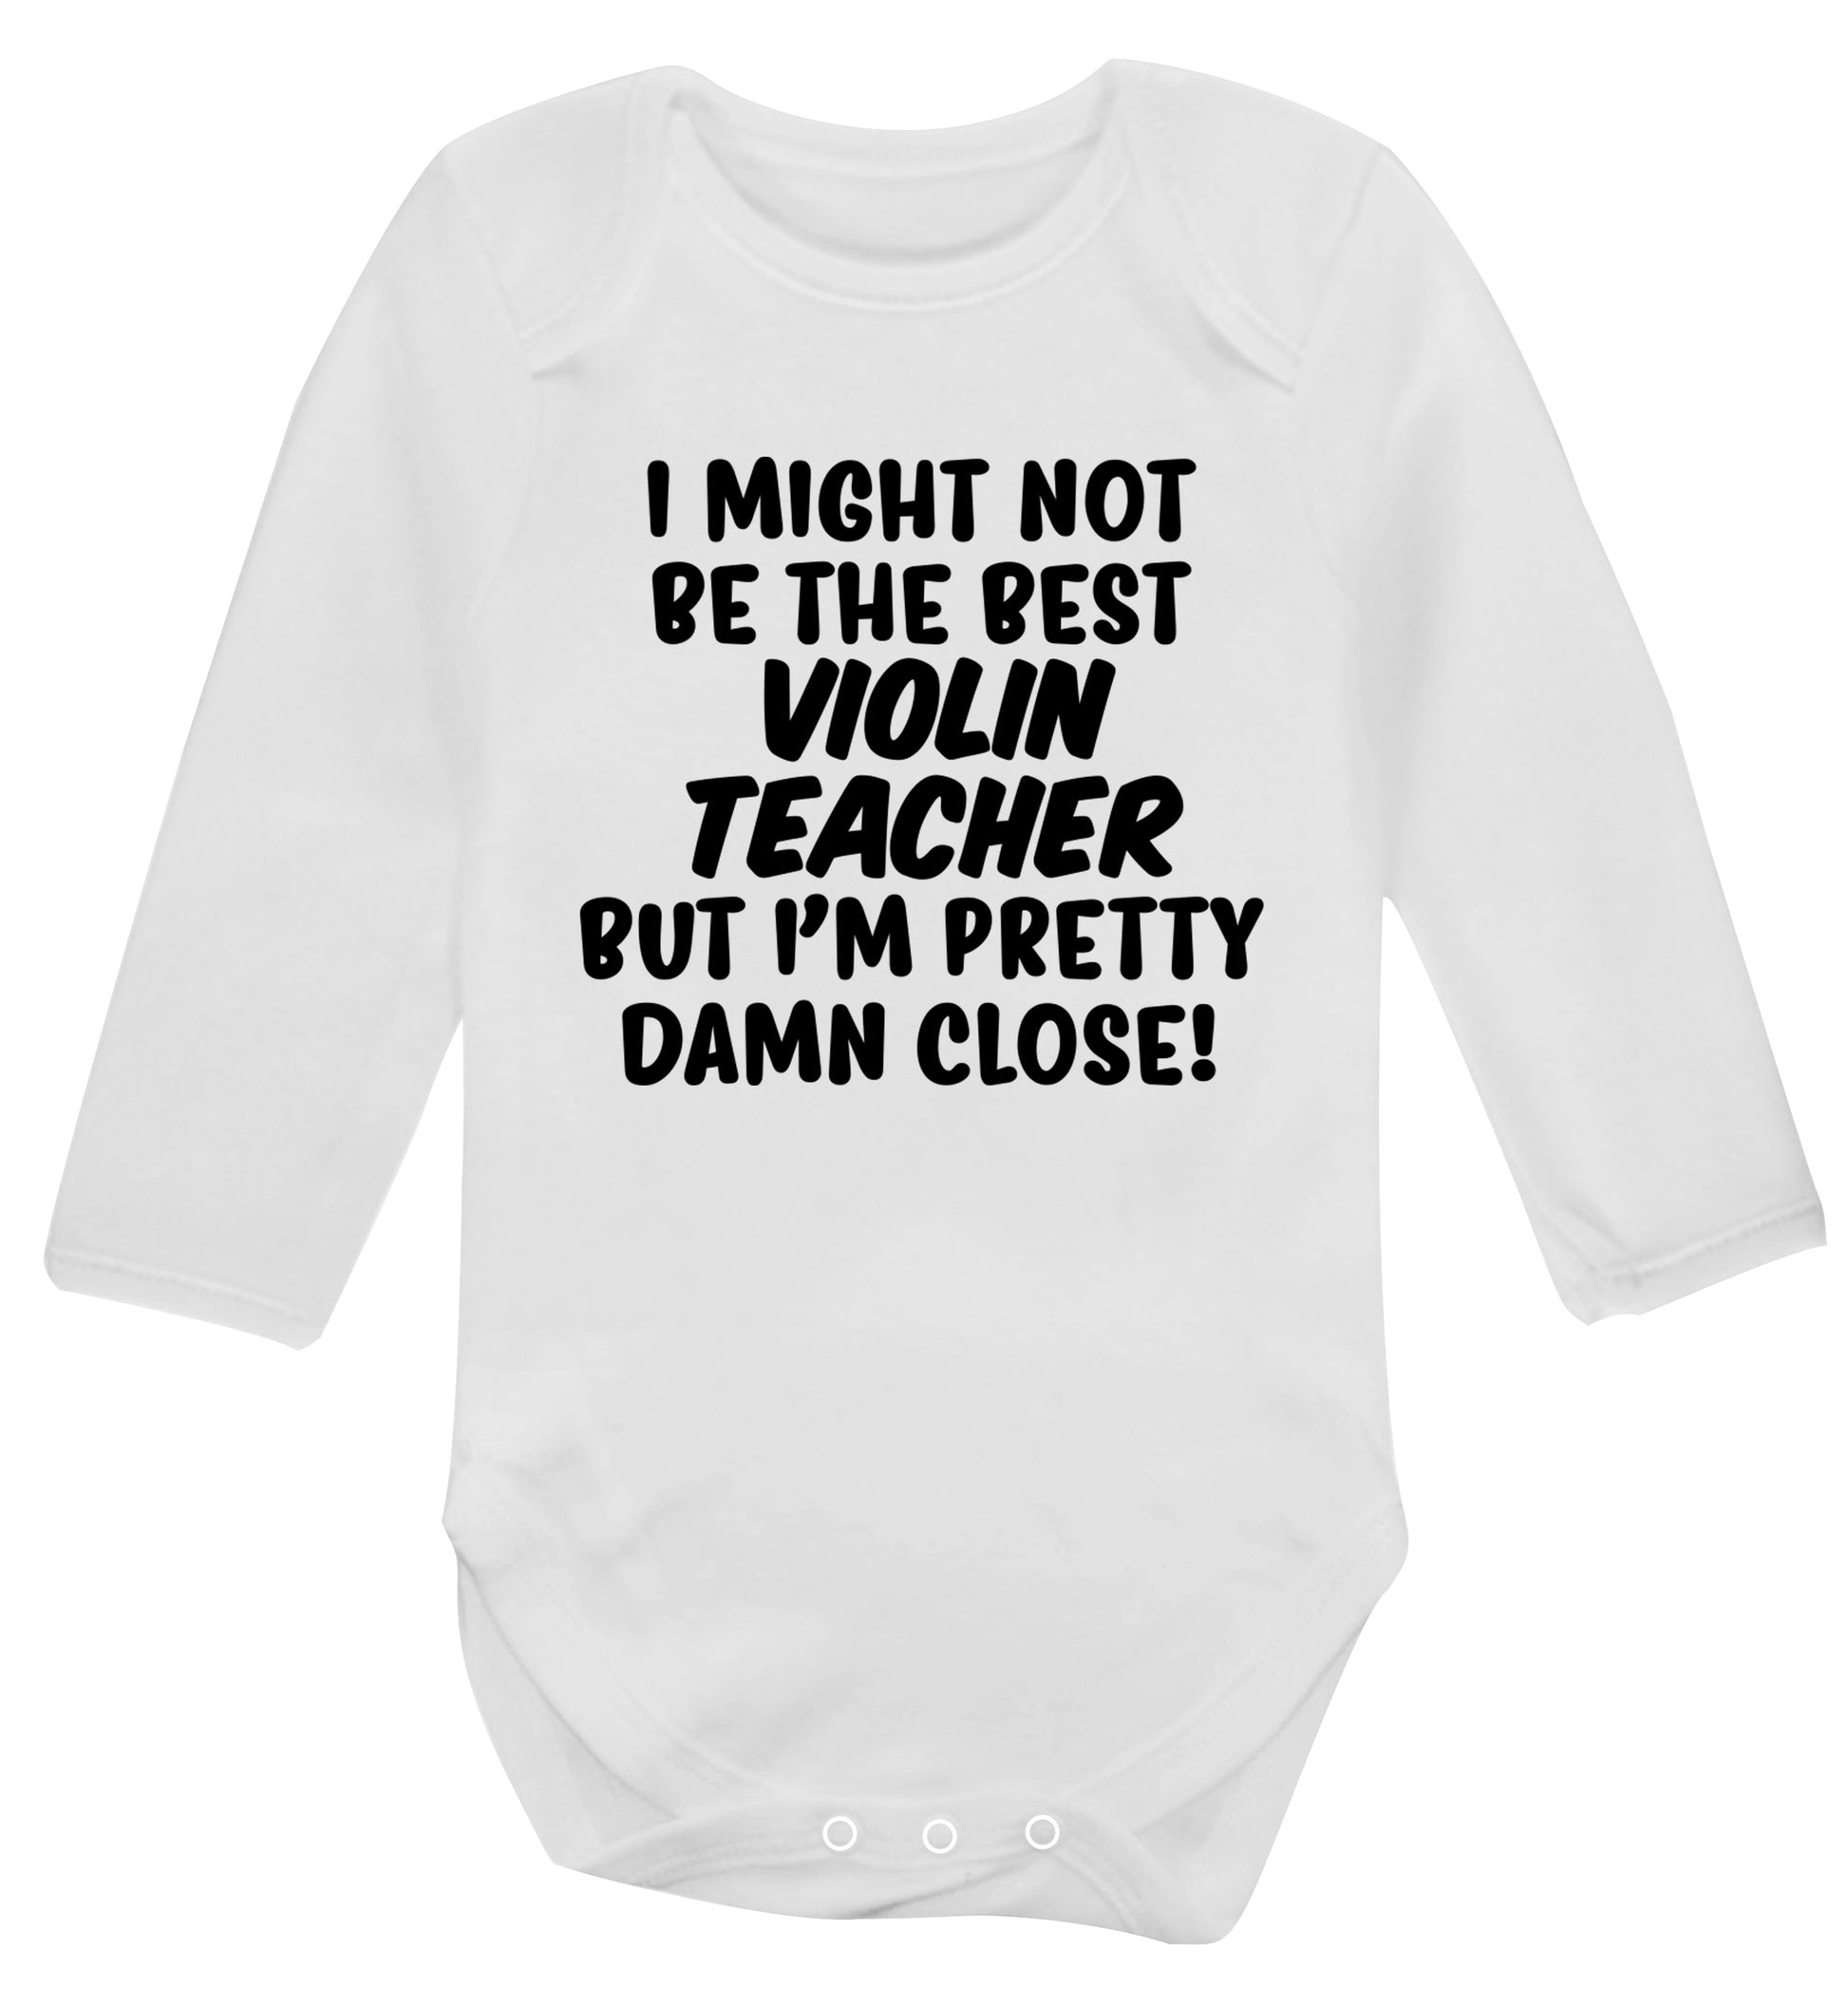 I might not be the best violin teacher but I'm pretty close Baby Vest long sleeved white 6-12 months